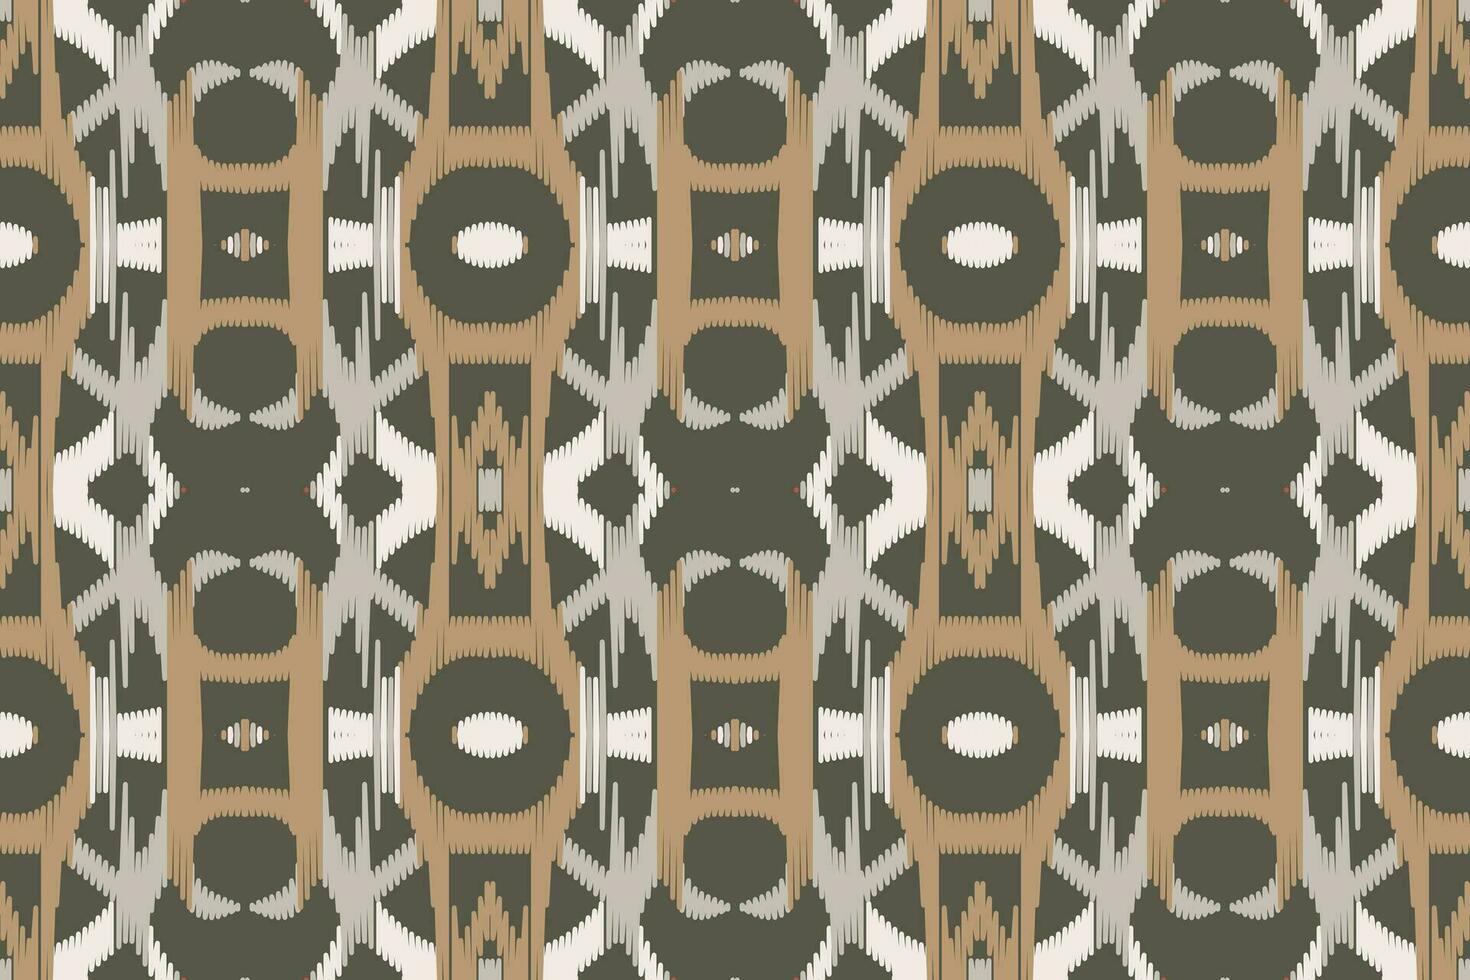 Motif Ikat Seamless Pattern Embroidery Background. Ikat Triangle Geometric Ethnic Oriental Pattern traditional.aztec Style Abstract Vector design for Texture,fabric,clothing,wrapping,sarong.